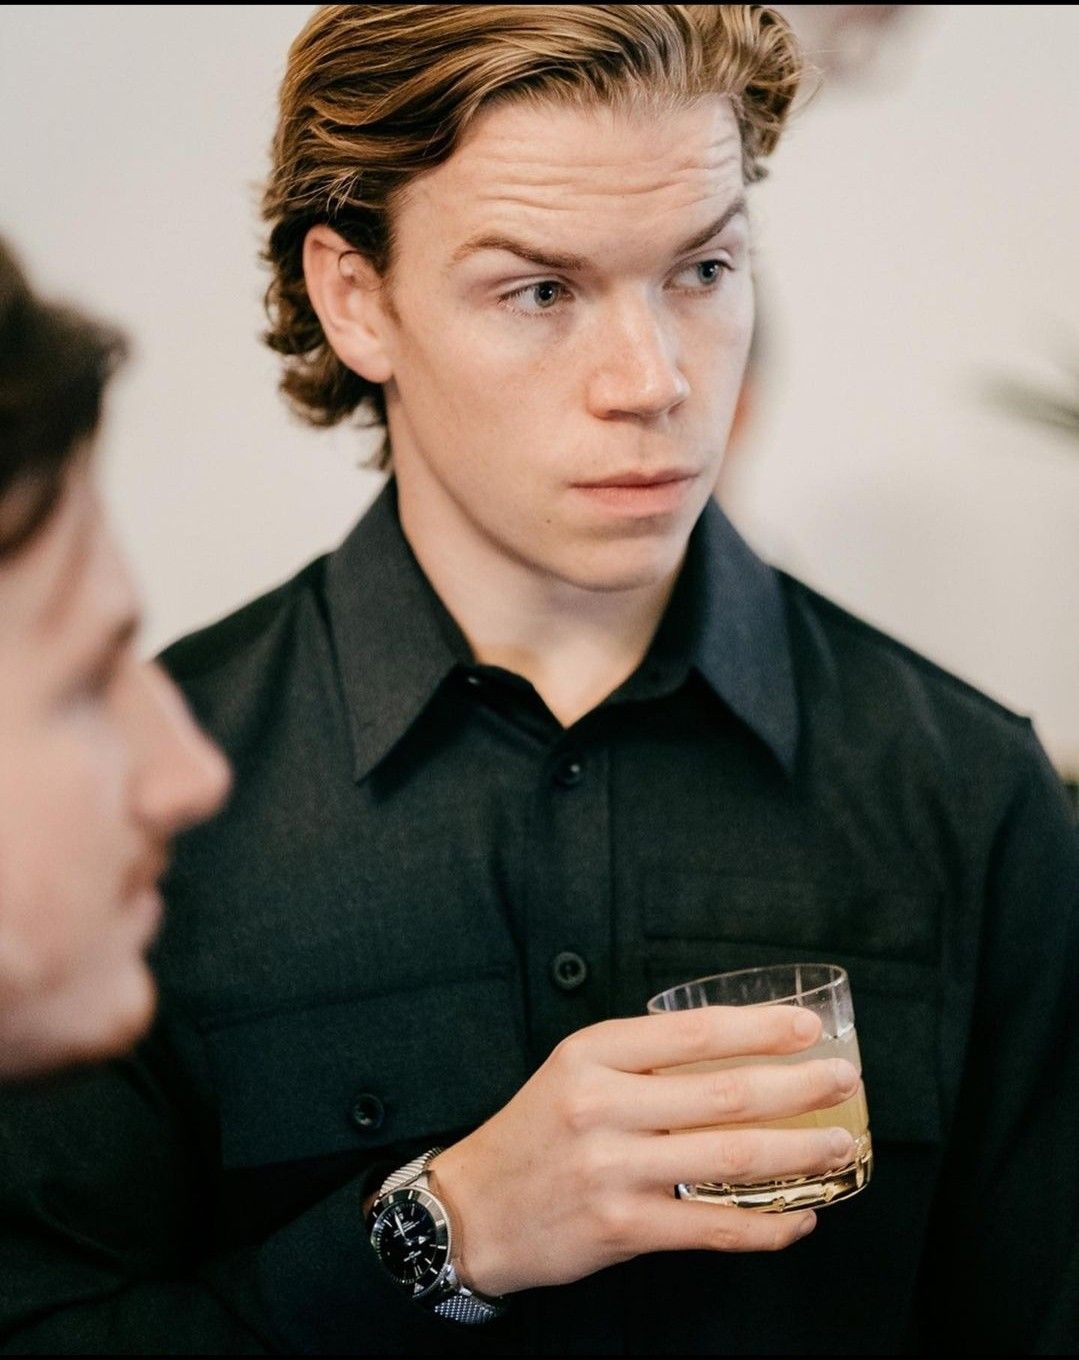 Will Poulter. Will poulter, Celebrities male, Attractive men